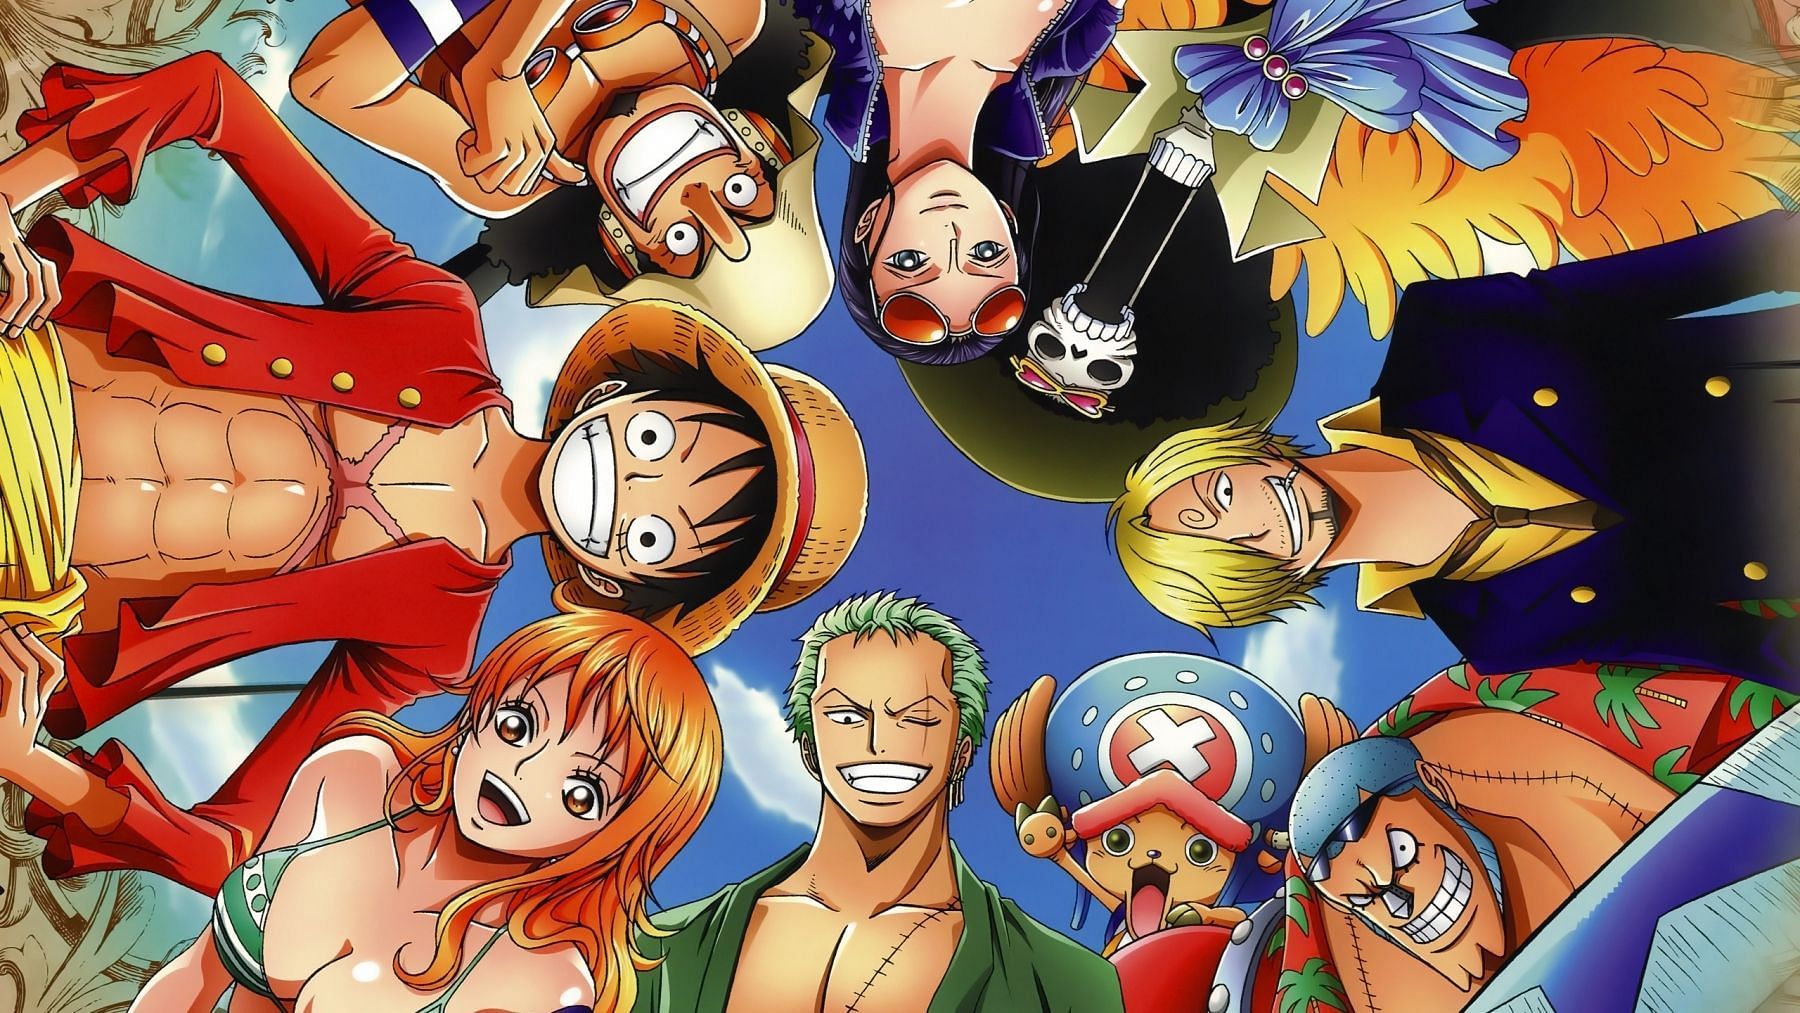 Is One Piece the greatest anime show of all time? (Image via Toei animation)